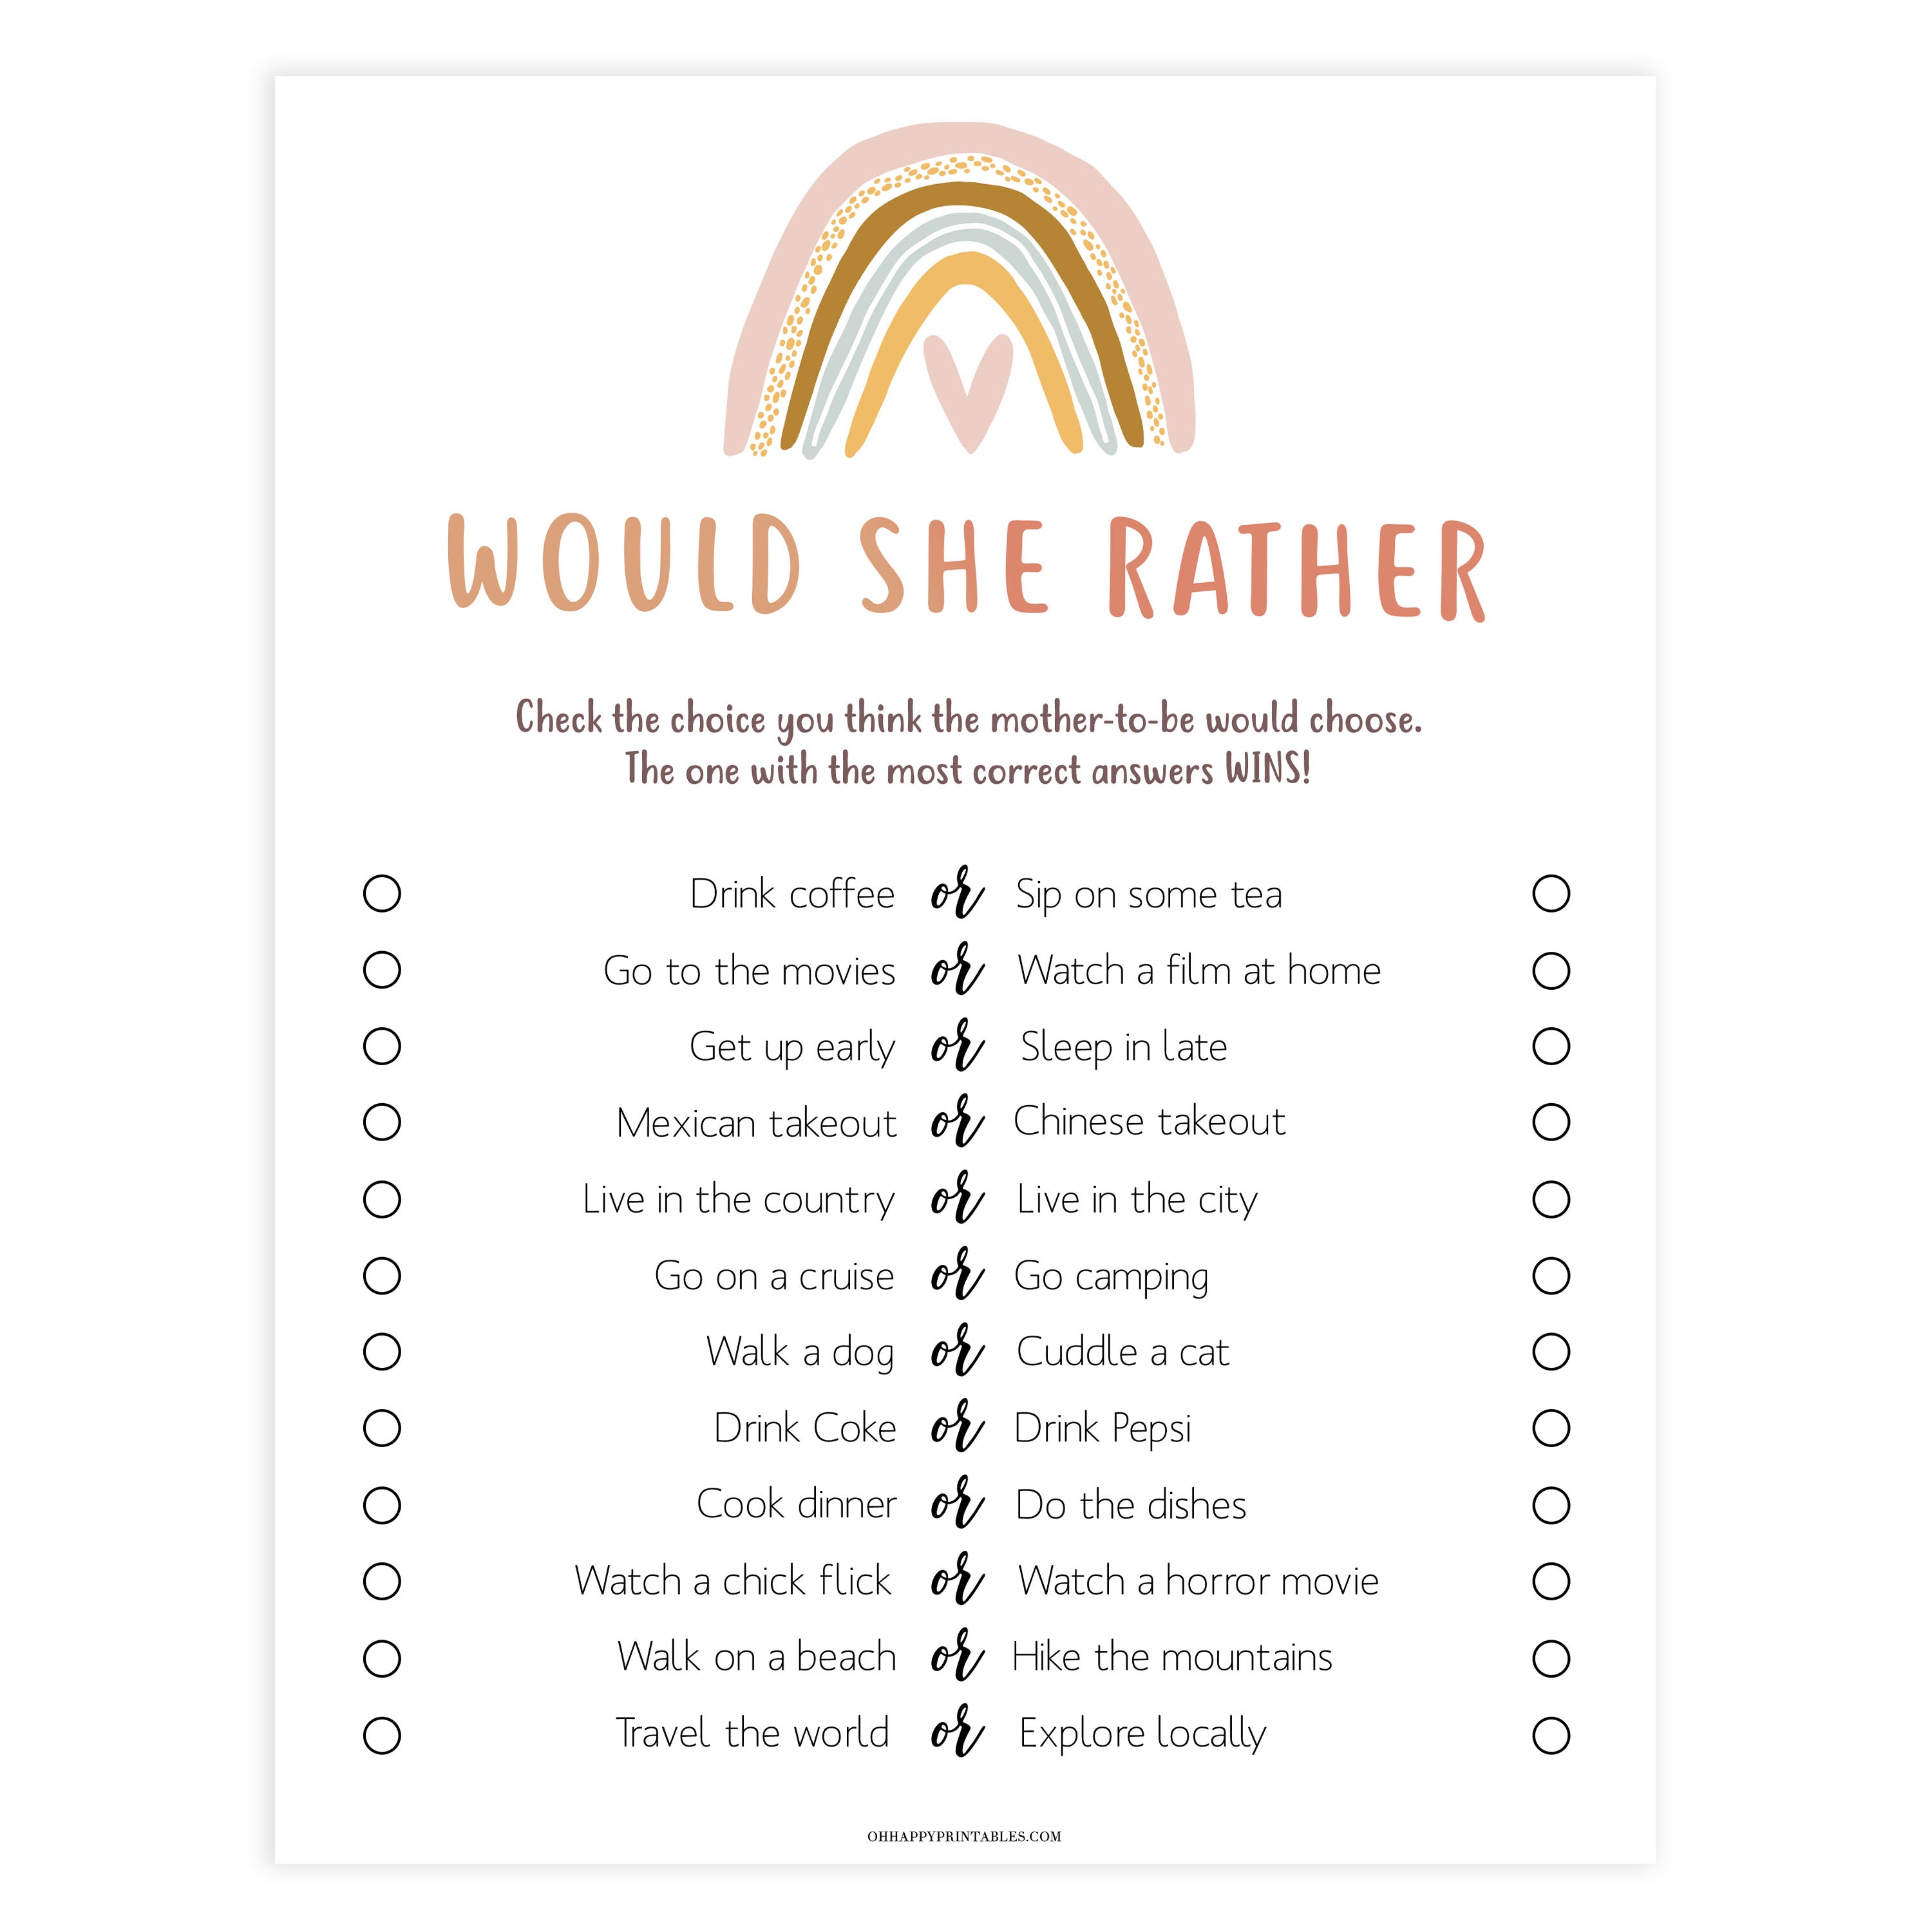 would she rather baby shower game, Printable baby shower games, boho rainbow baby games, baby shower games, fun baby shower ideas, top baby shower ideas, boho rainbow baby shower, baby shower games, fun boho rainbow baby shower ideas